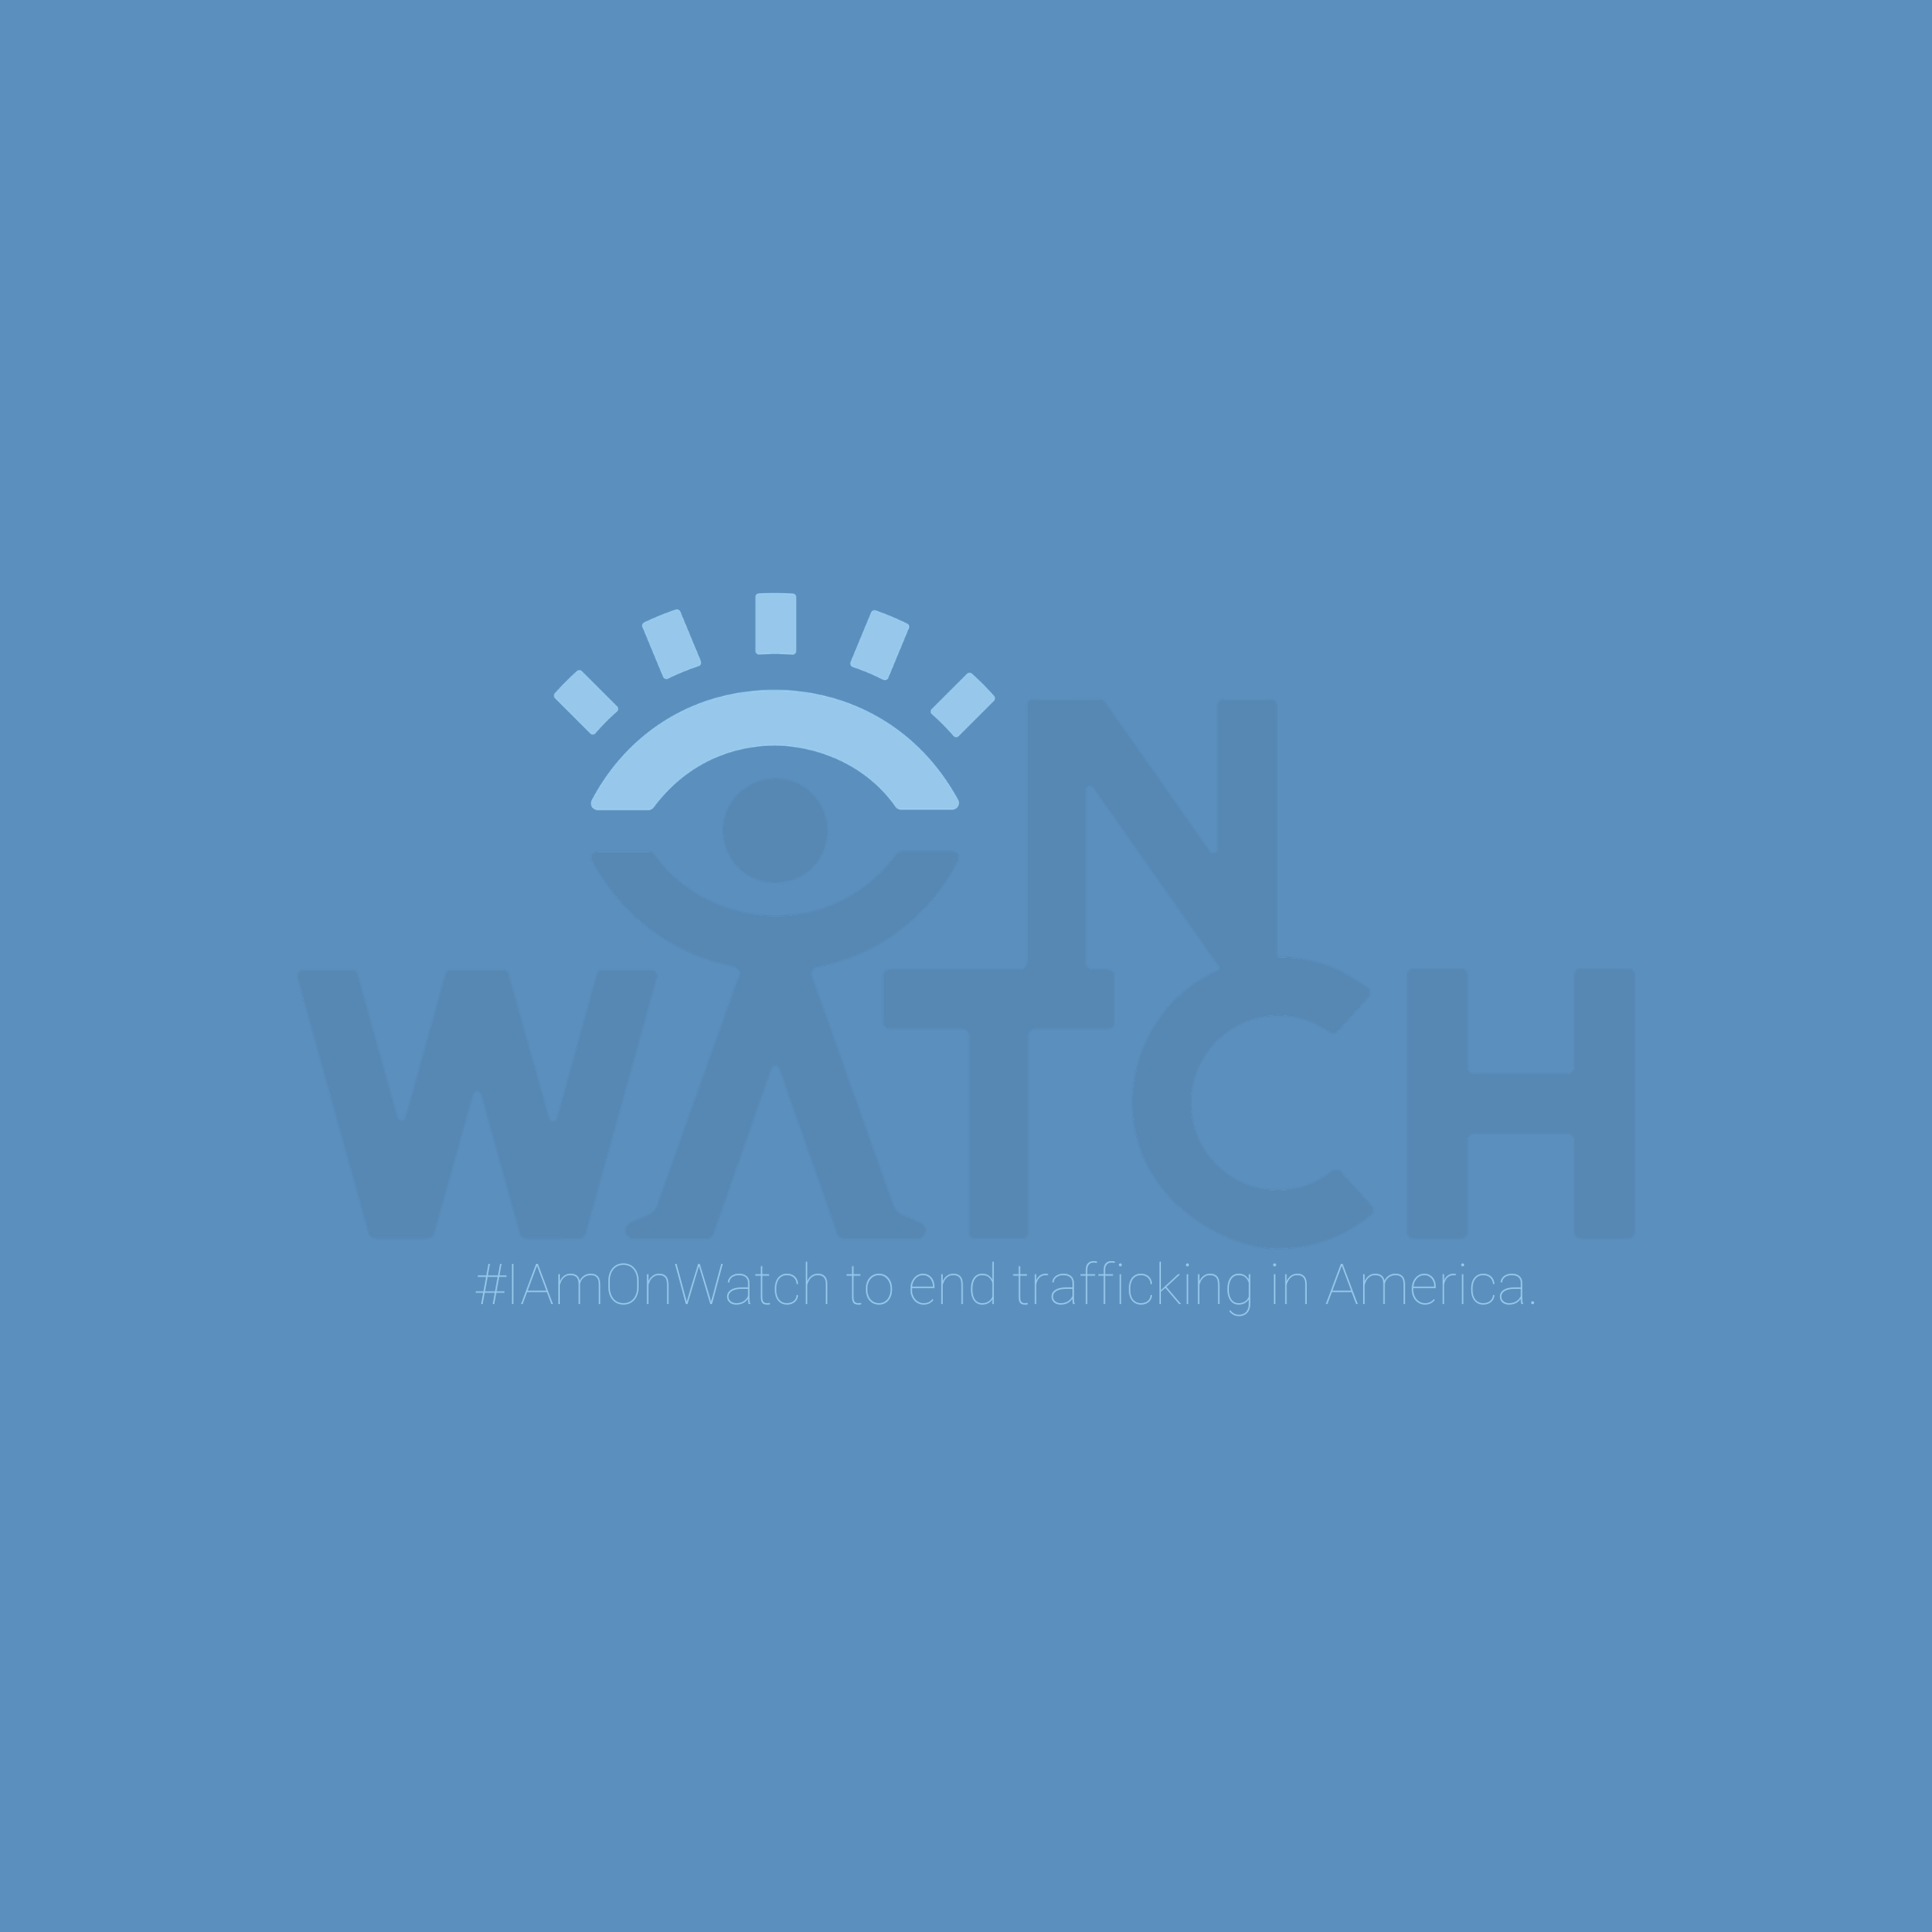 Rapzilla - OnWatch Aims To Lower 40% Rise In Sex Trafficking During COVID-19